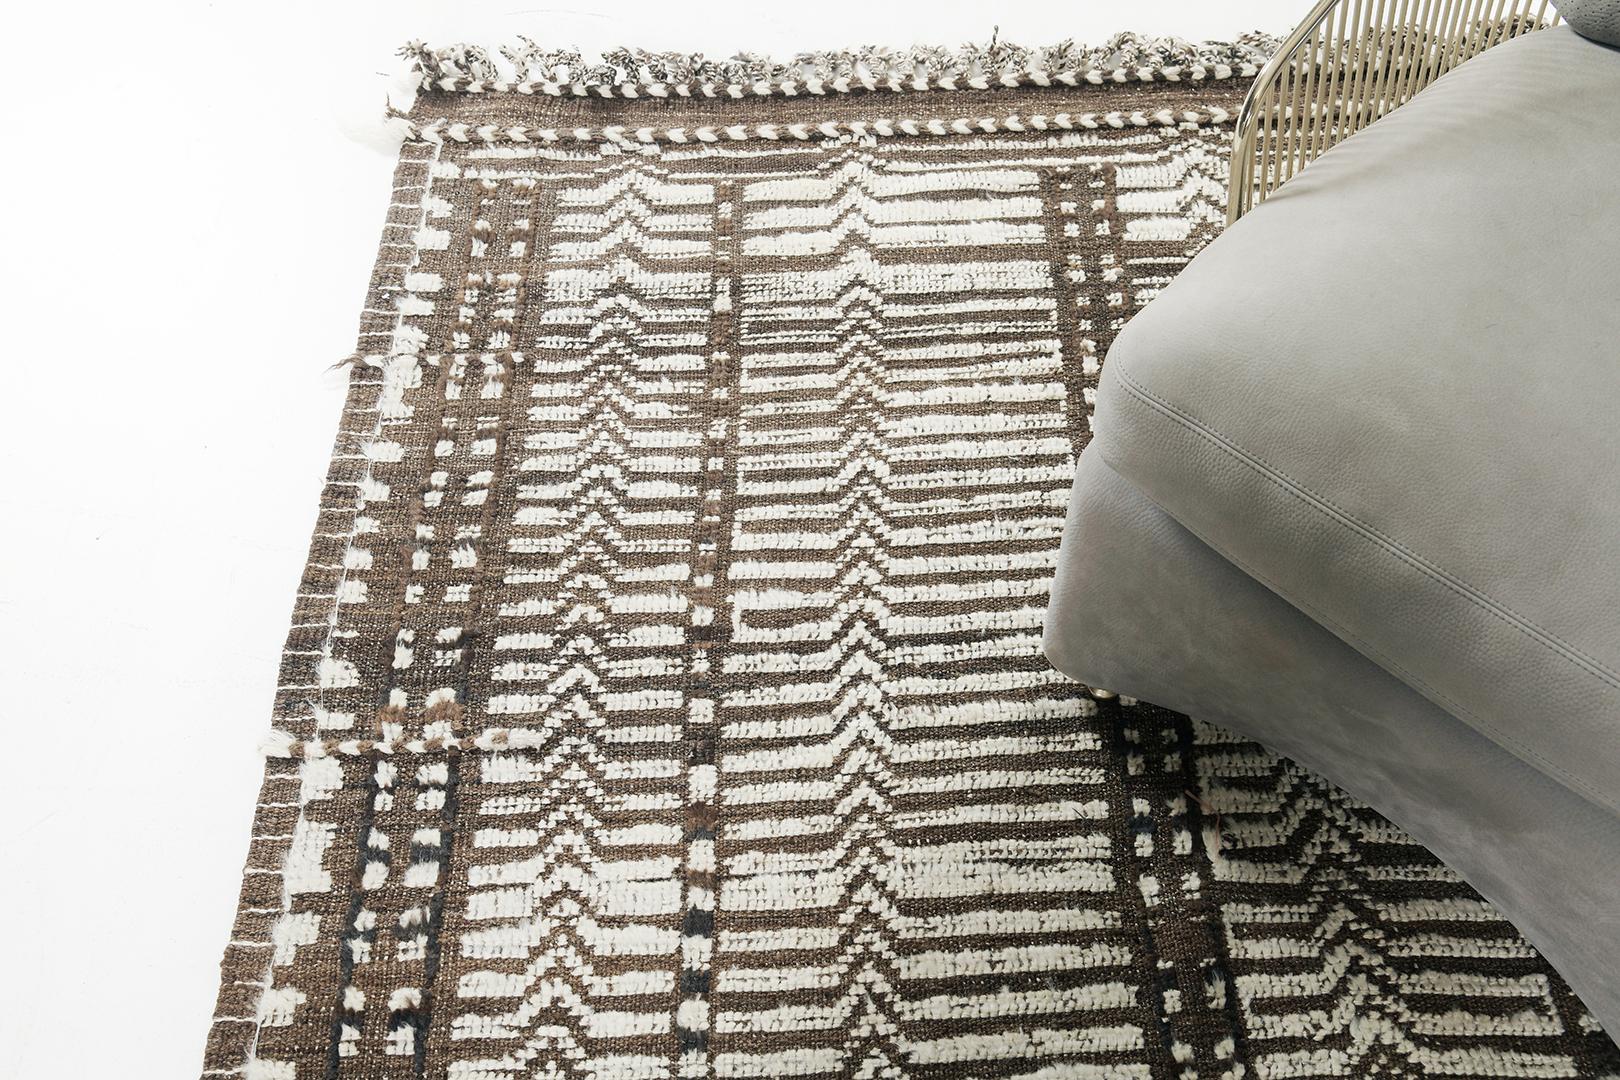 Tala’ displays a series of linear formation cohesively blending together forming a distinct character of the entirety of this magnificent rug. Rendered in chocolate brown and ivory, the texture of this mesmerizing rug brings out the warm and cozy